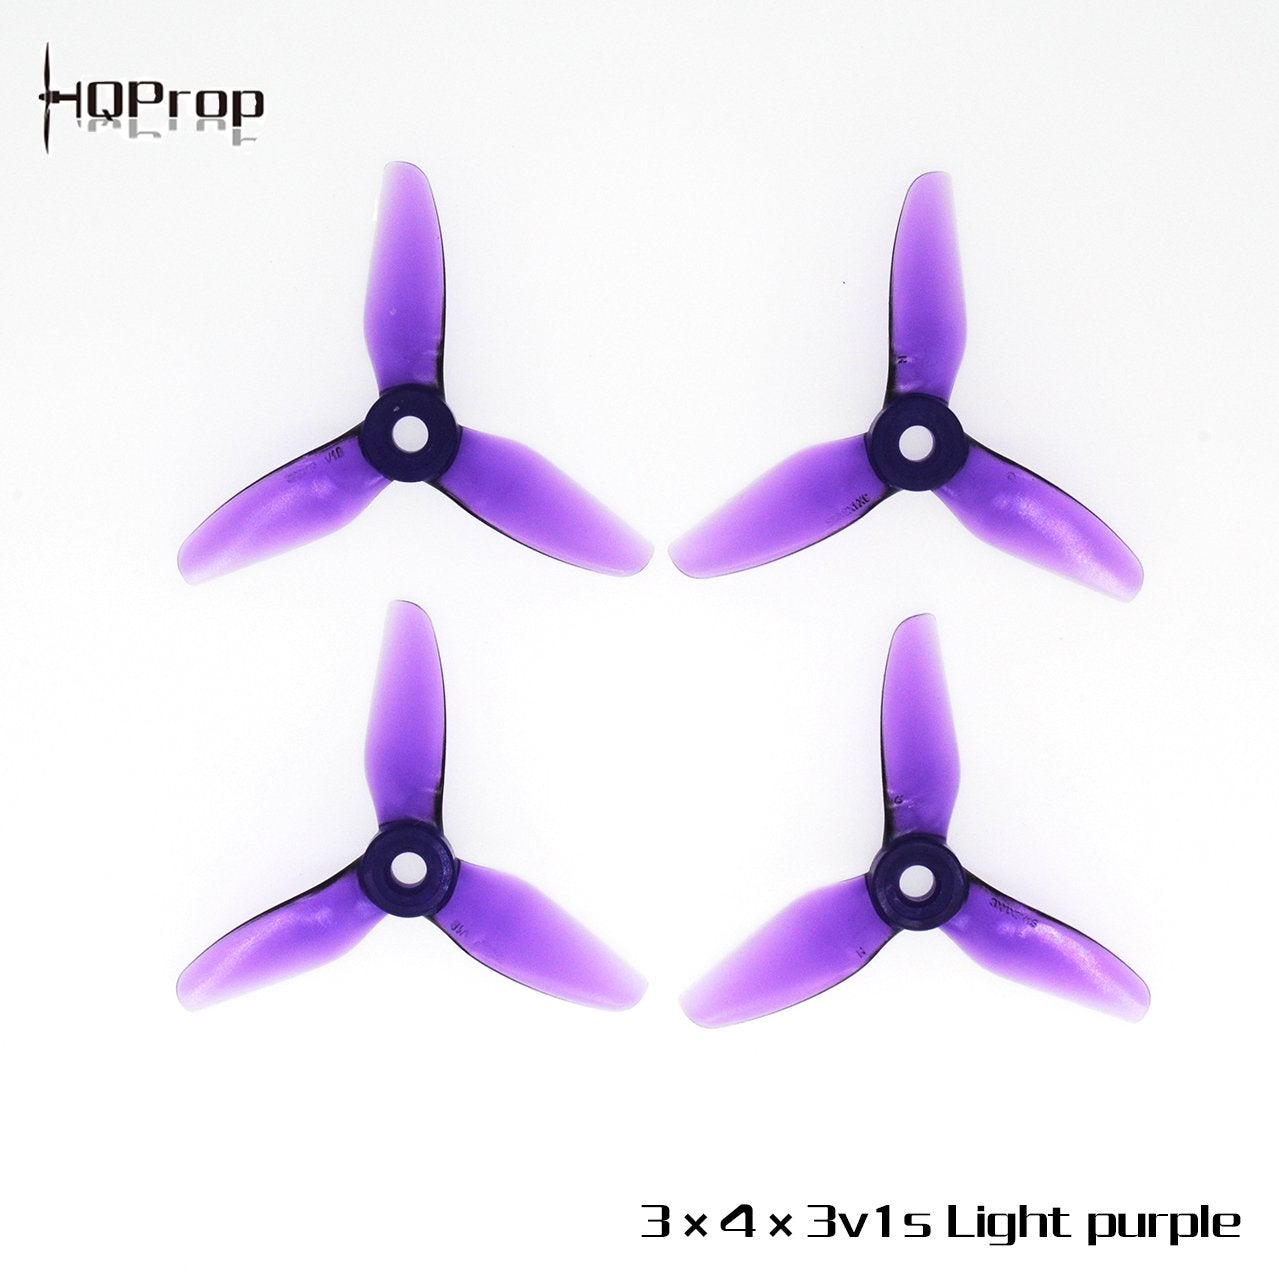 HQProp 3X4X3V1S Tri-Blade 3 inch Propellers 2 - HQProp - Drone Authority